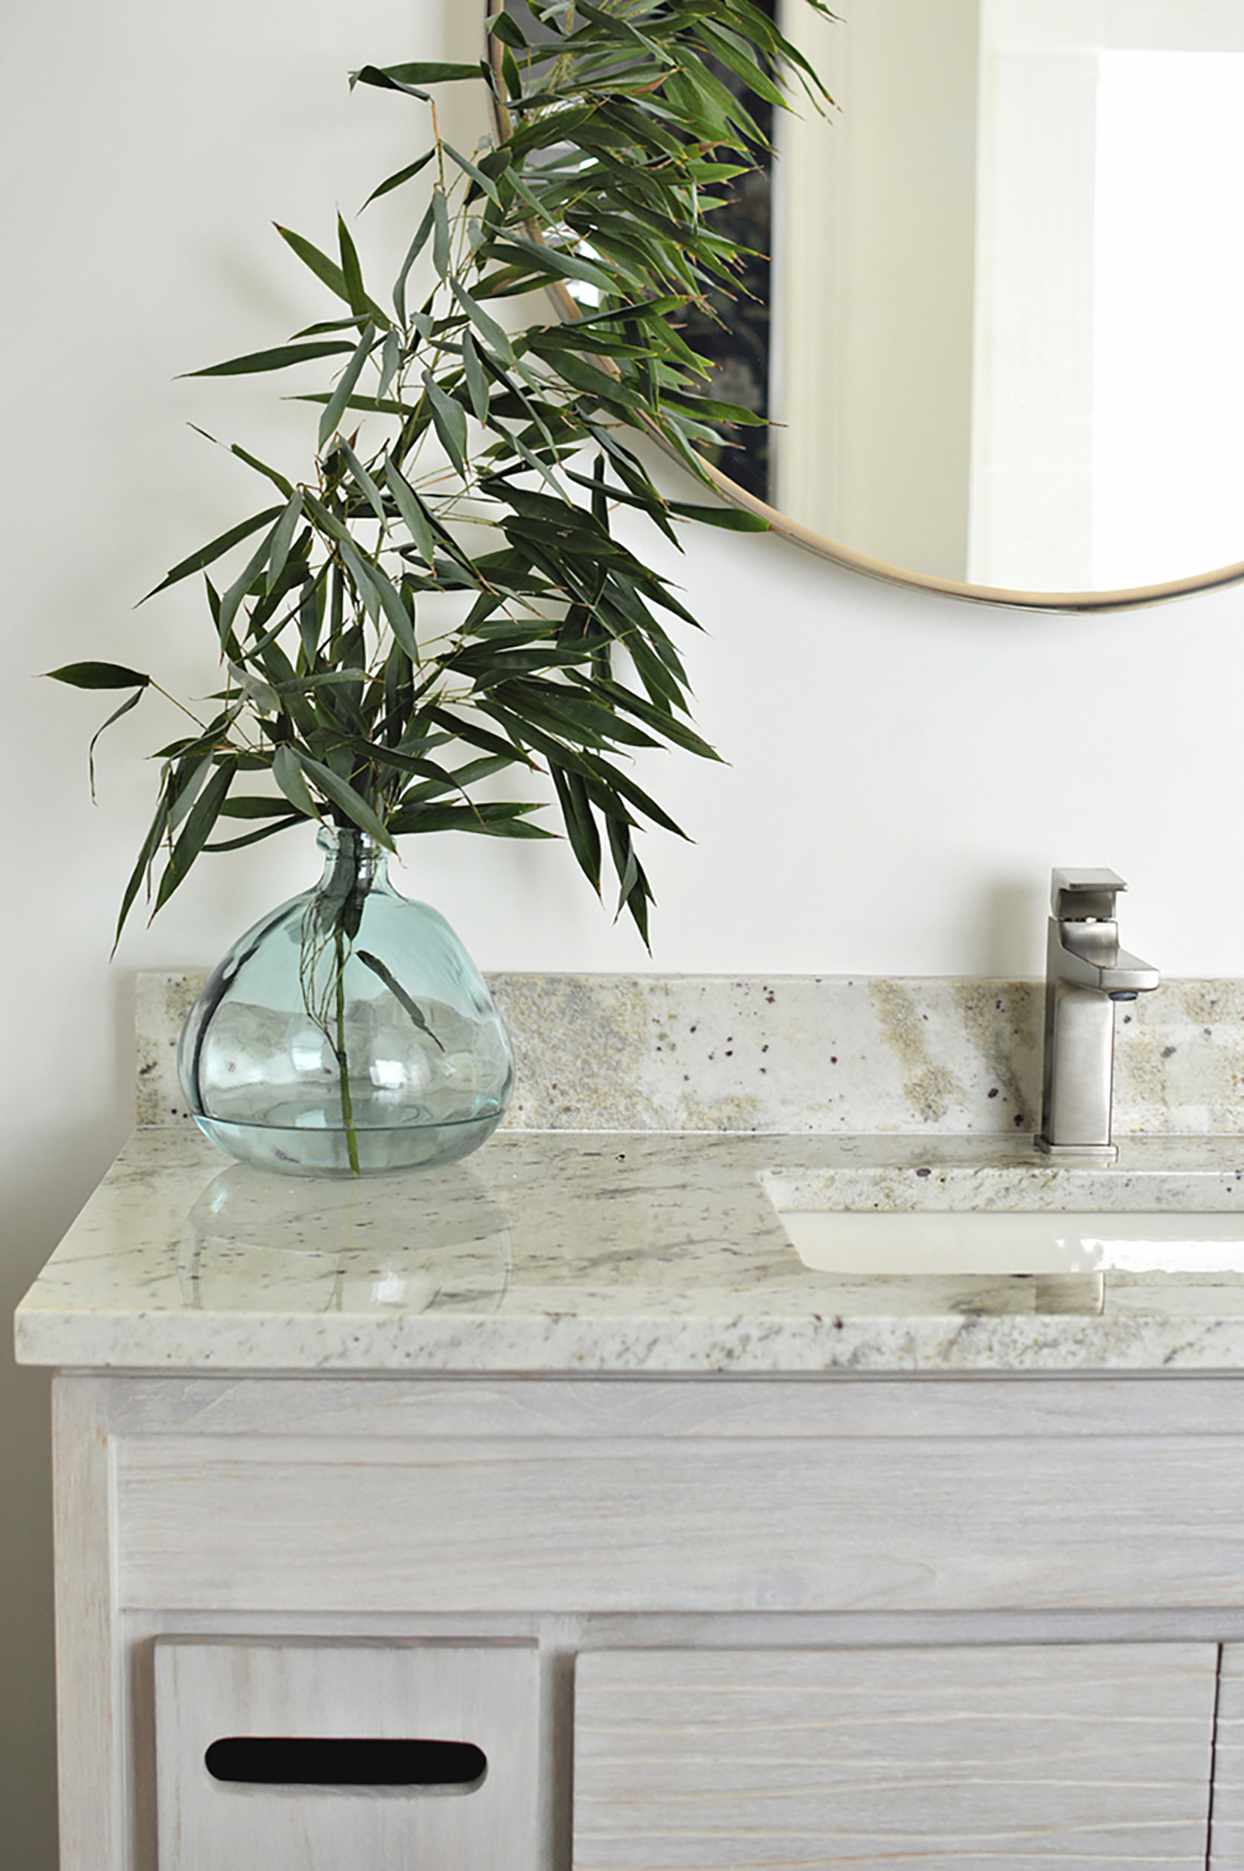 bathroom counter and sink area with glass vase and plant